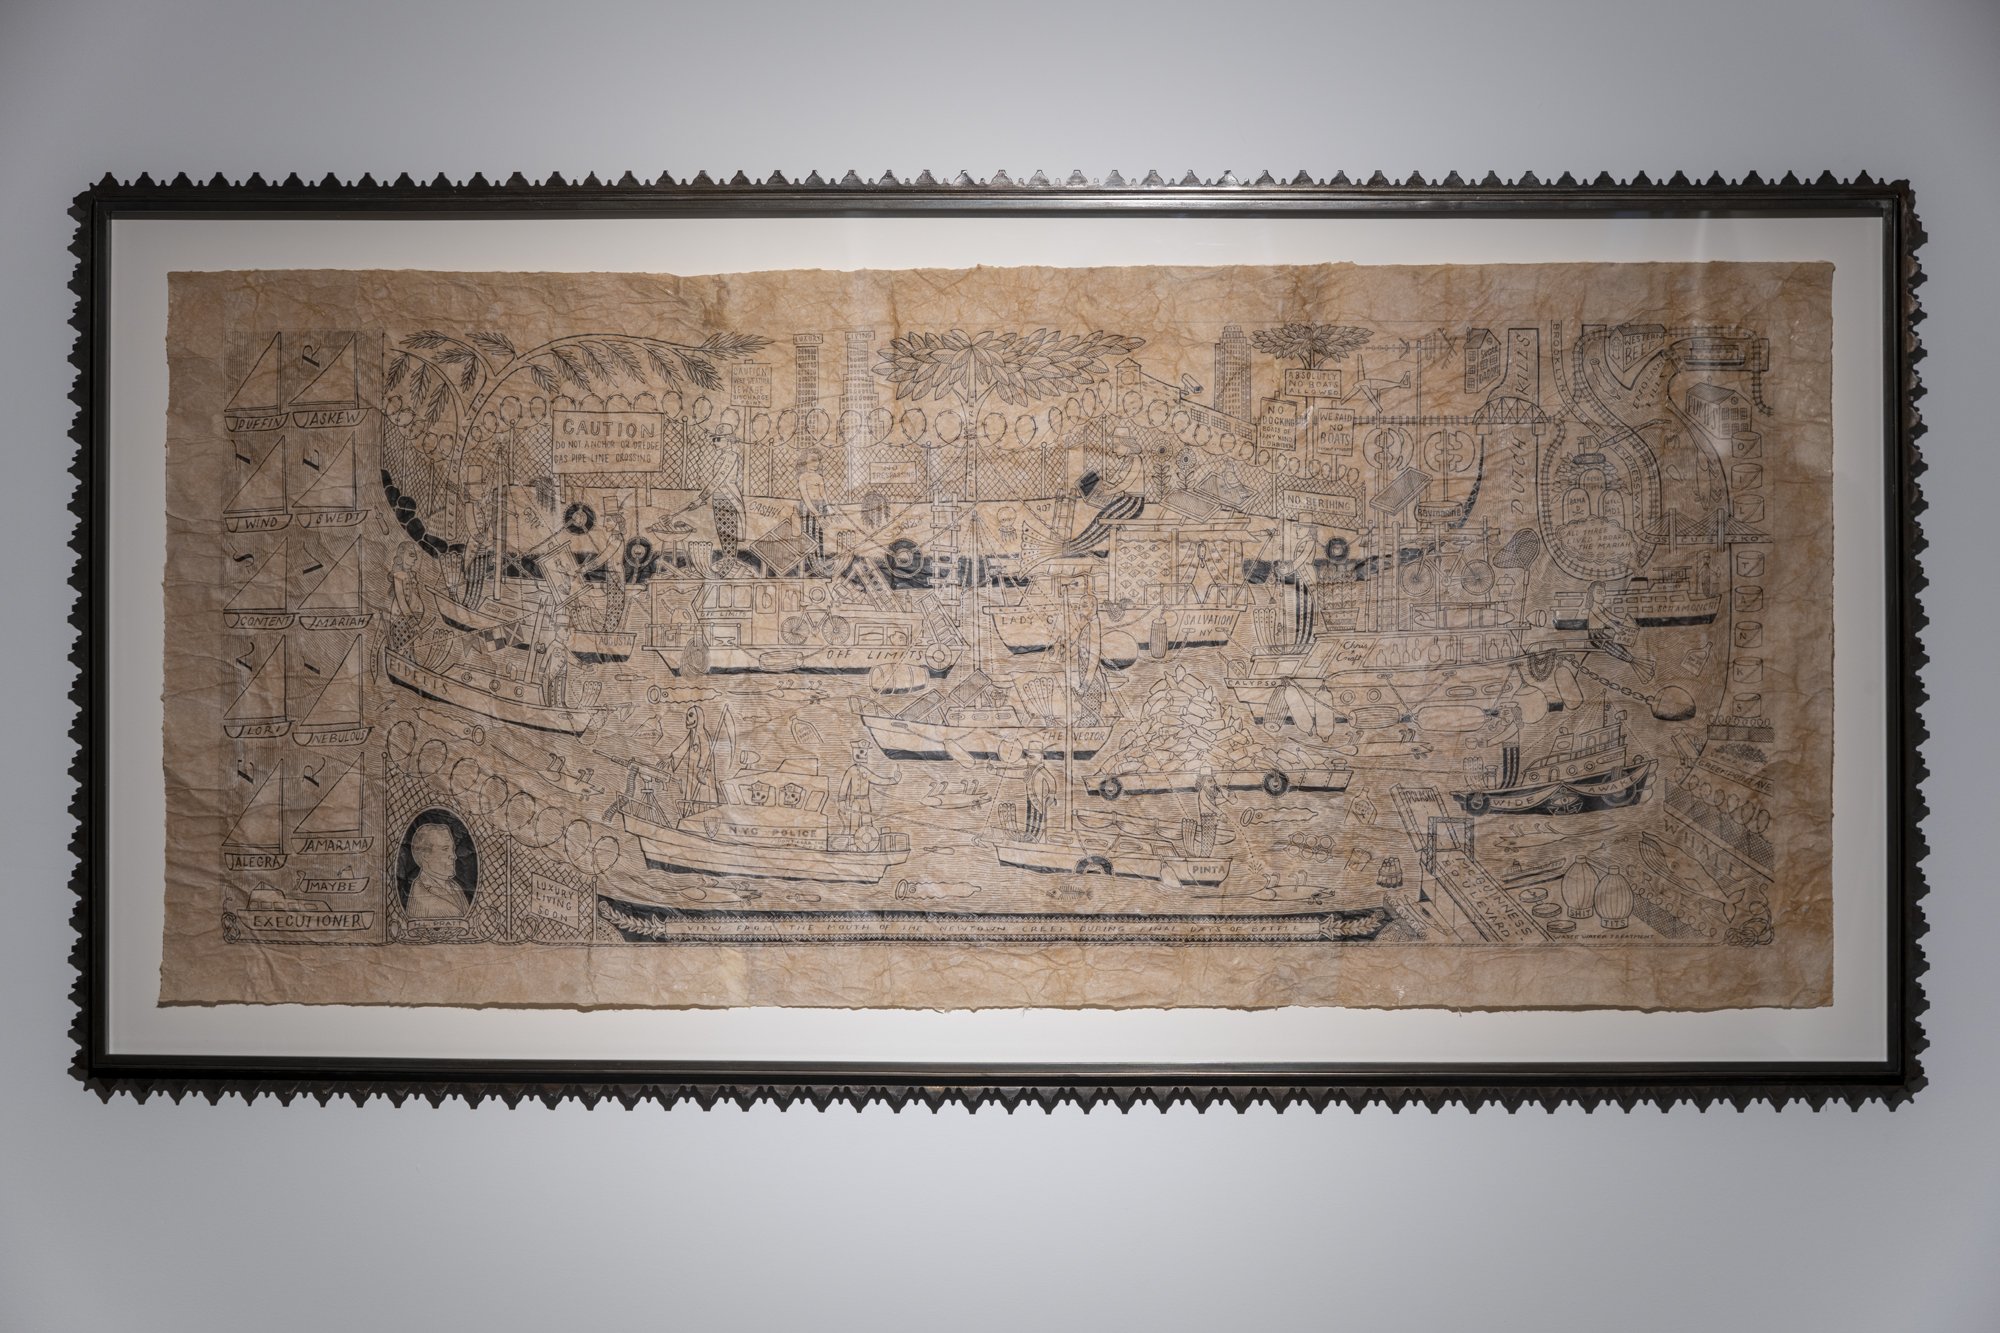   The View From The Mouth Of The Newtown Creek During Final Days of Battle,  2021, Ink on canary paper, 24" x 60". Photography courtesy of Danny Perez.&nbsp; 